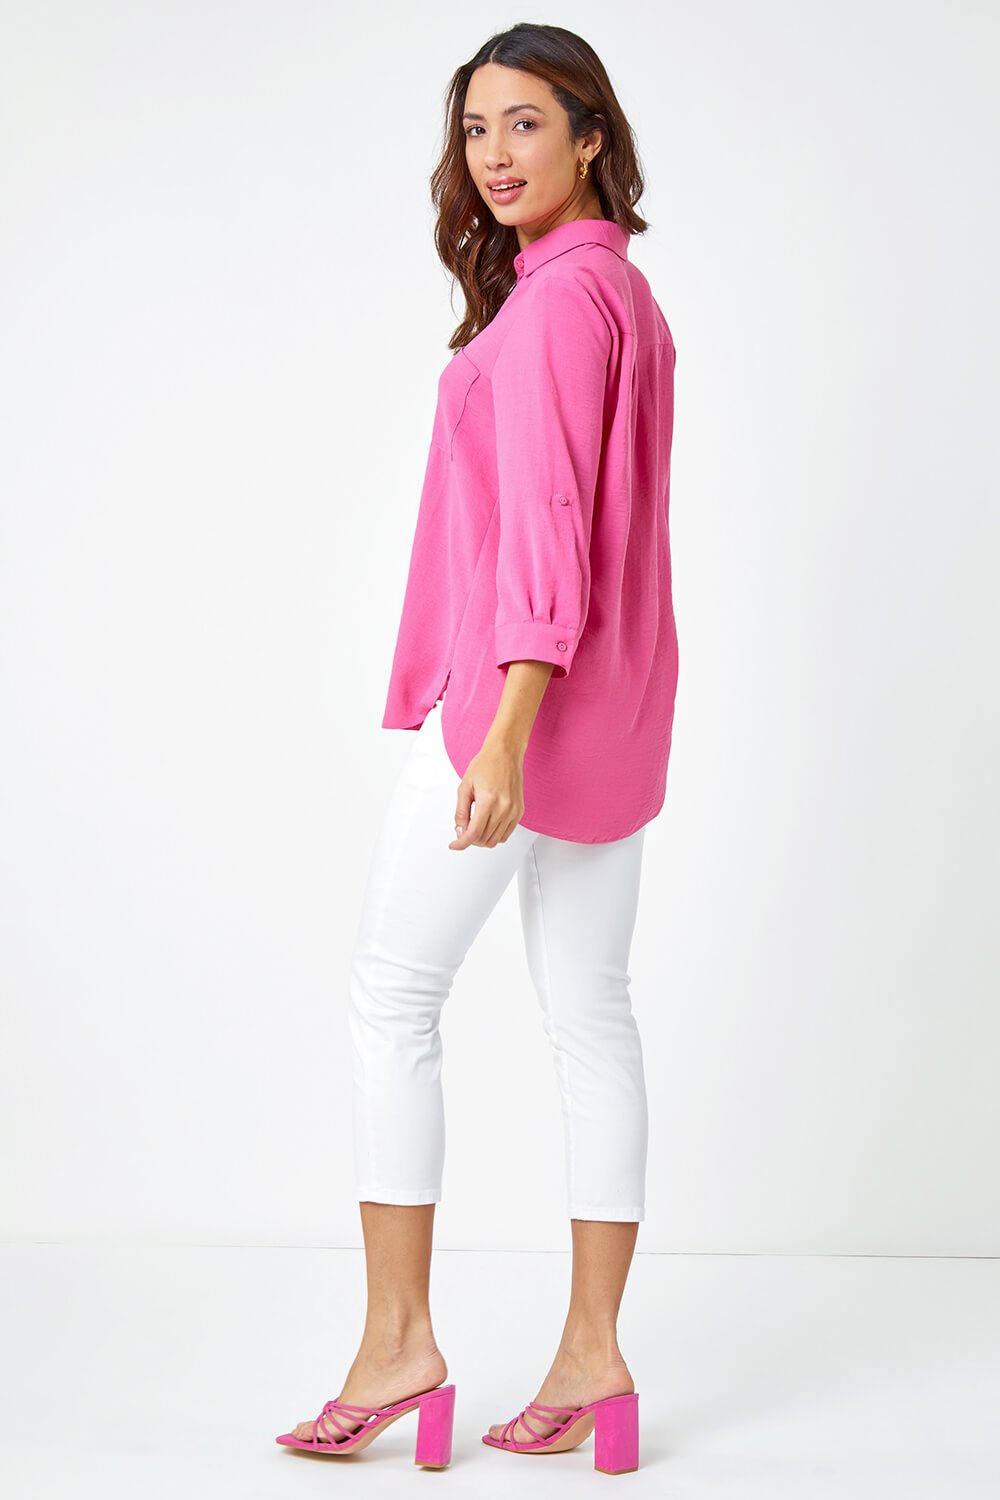 PINK Relaxed Longline Shirt, Image 3 of 5